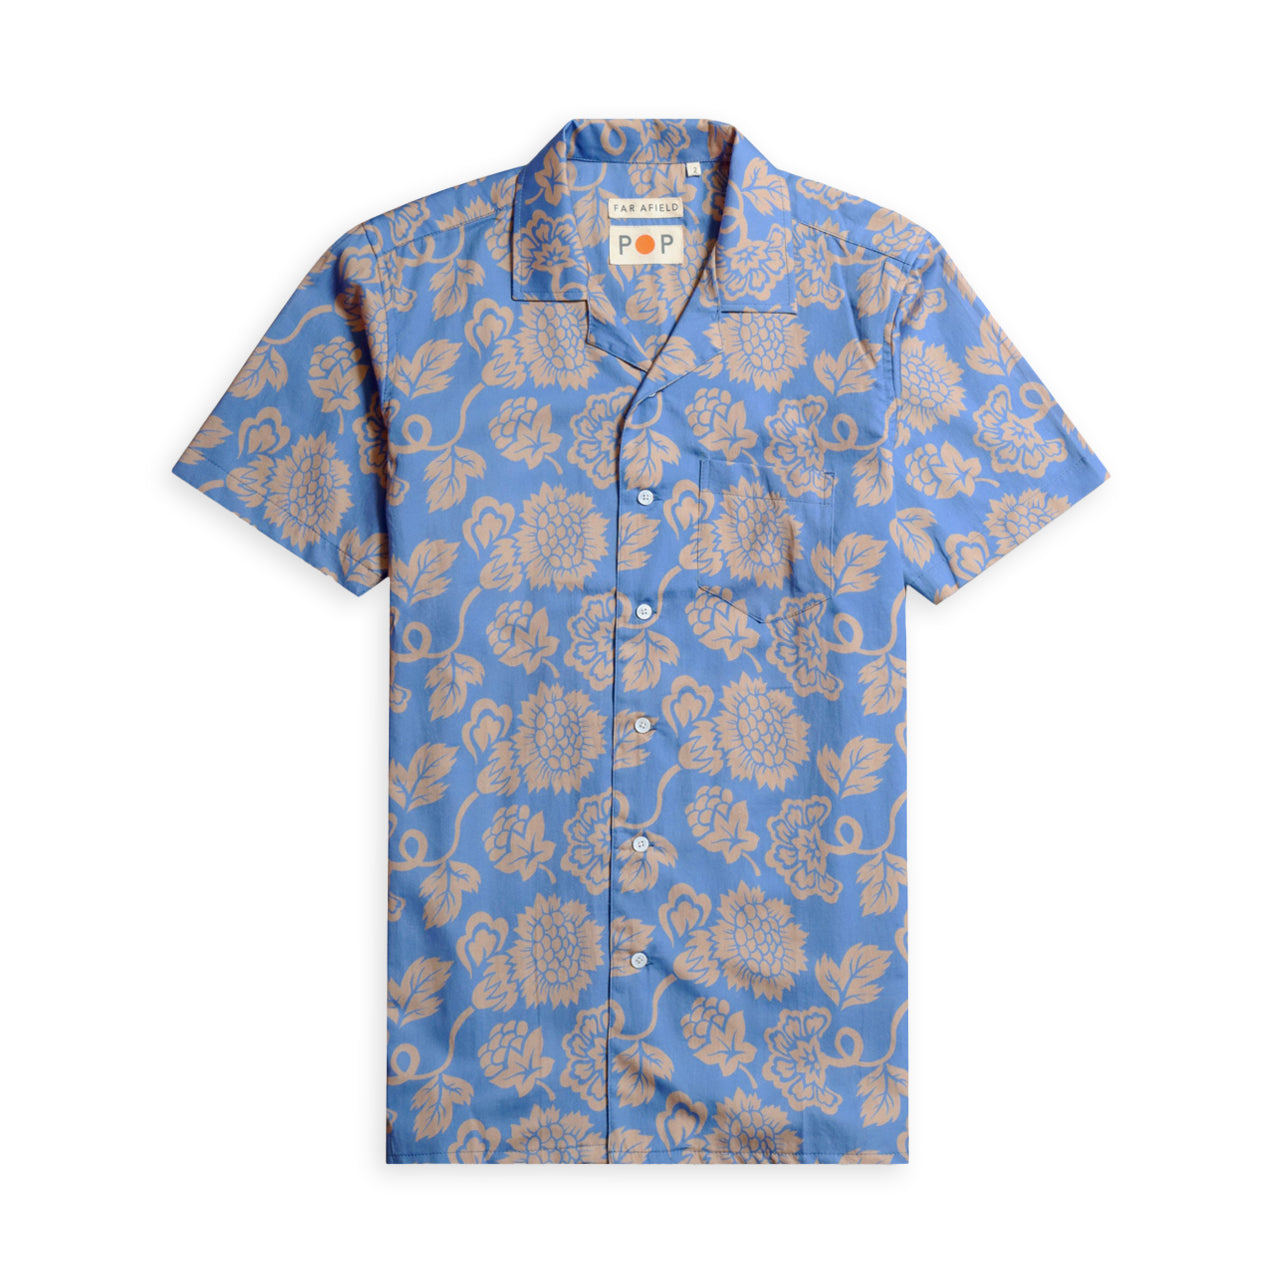 Far Afield Keanu Reeves Shirt | Uncrate Supply